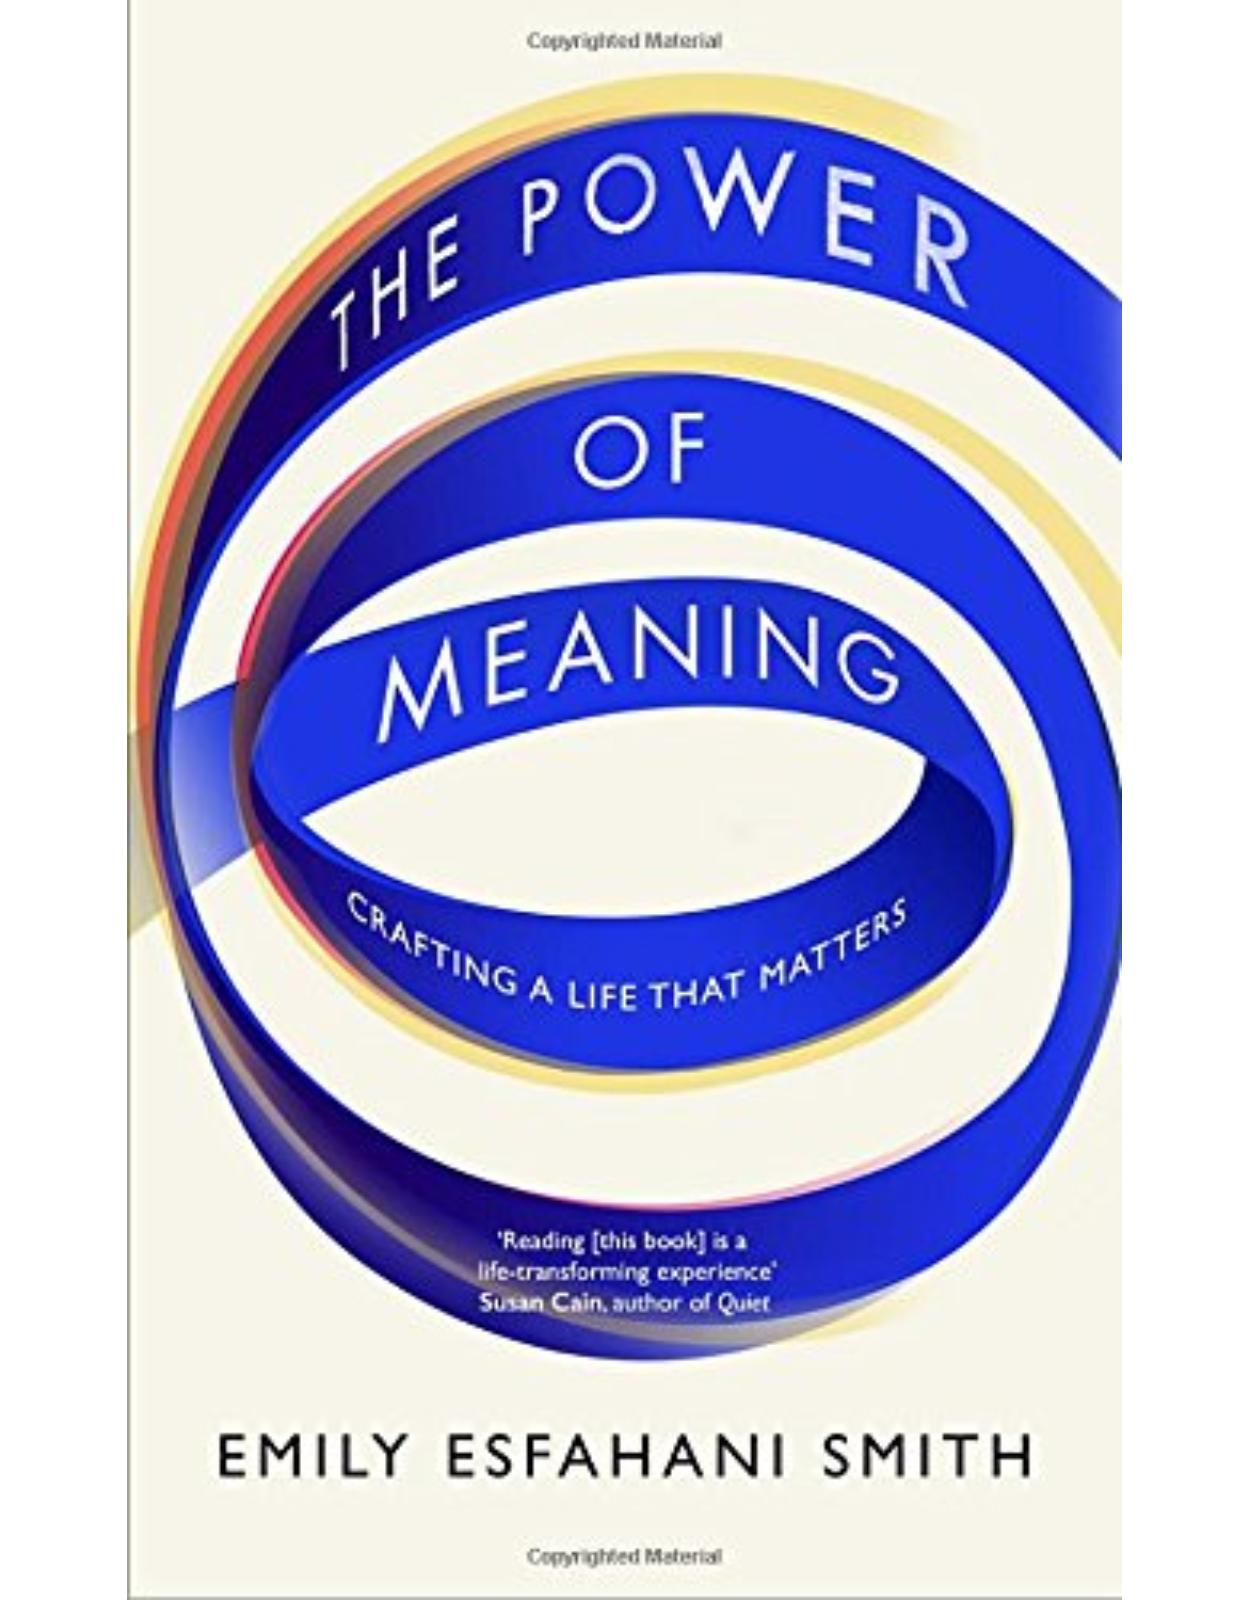 The Power of Meaning: Crafting a life that matters